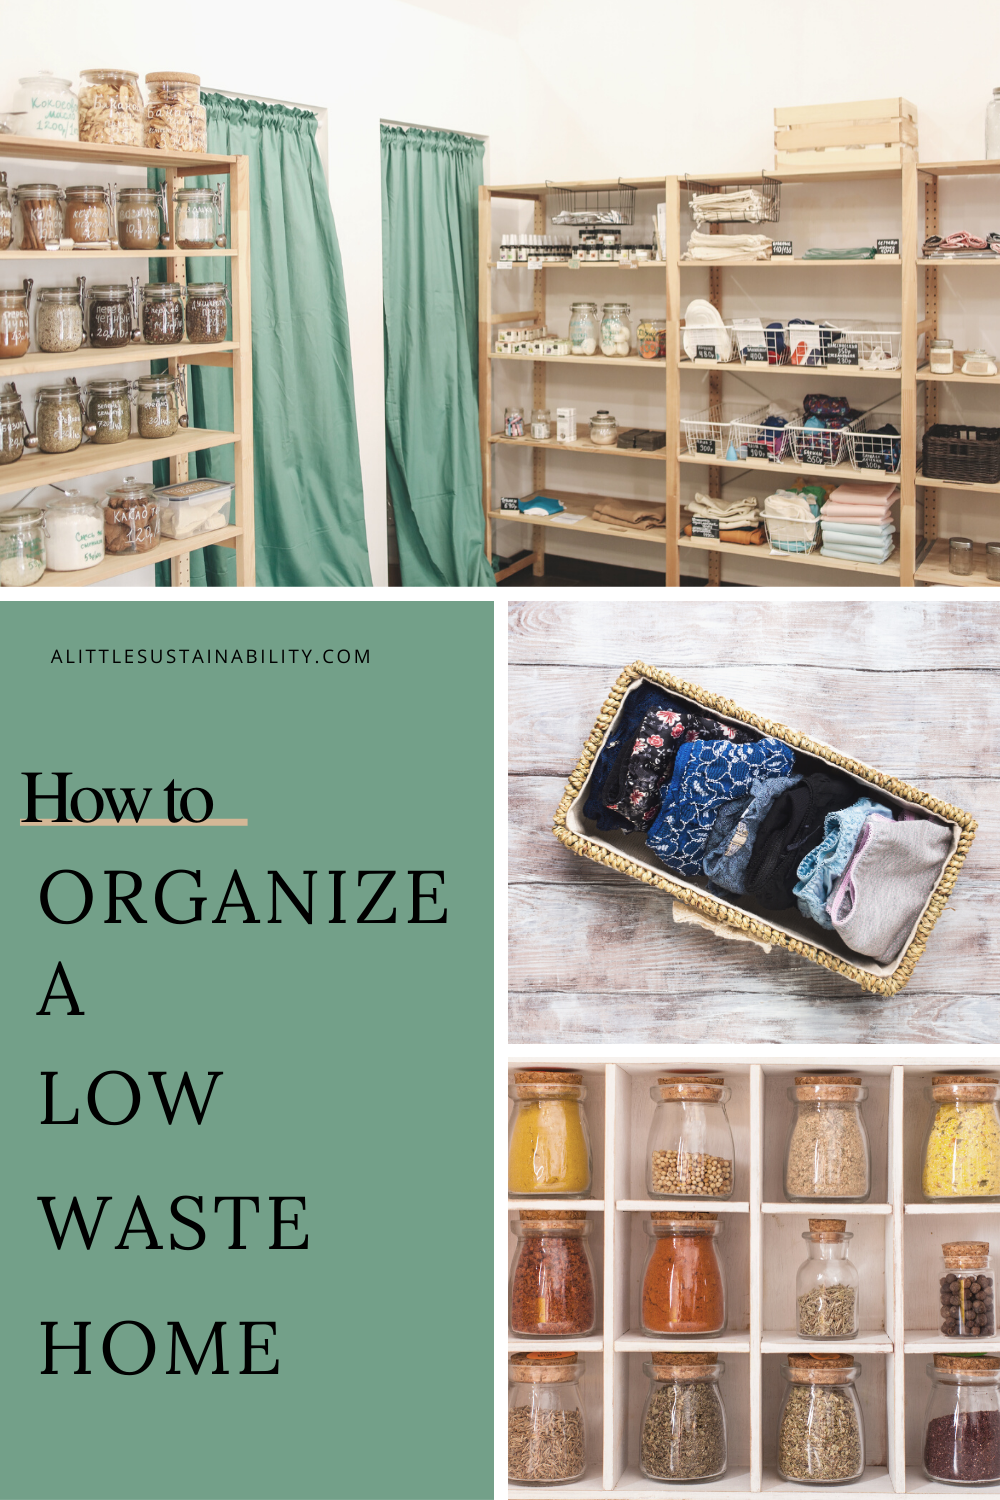 Organizing a low waste home may look different than organizing a normal home. A low waste home is more likely filled with reusable cloths, fresh produce, and bulk items. We can organize our home in a low waste and sustainable way. www.alittlesustainability.com